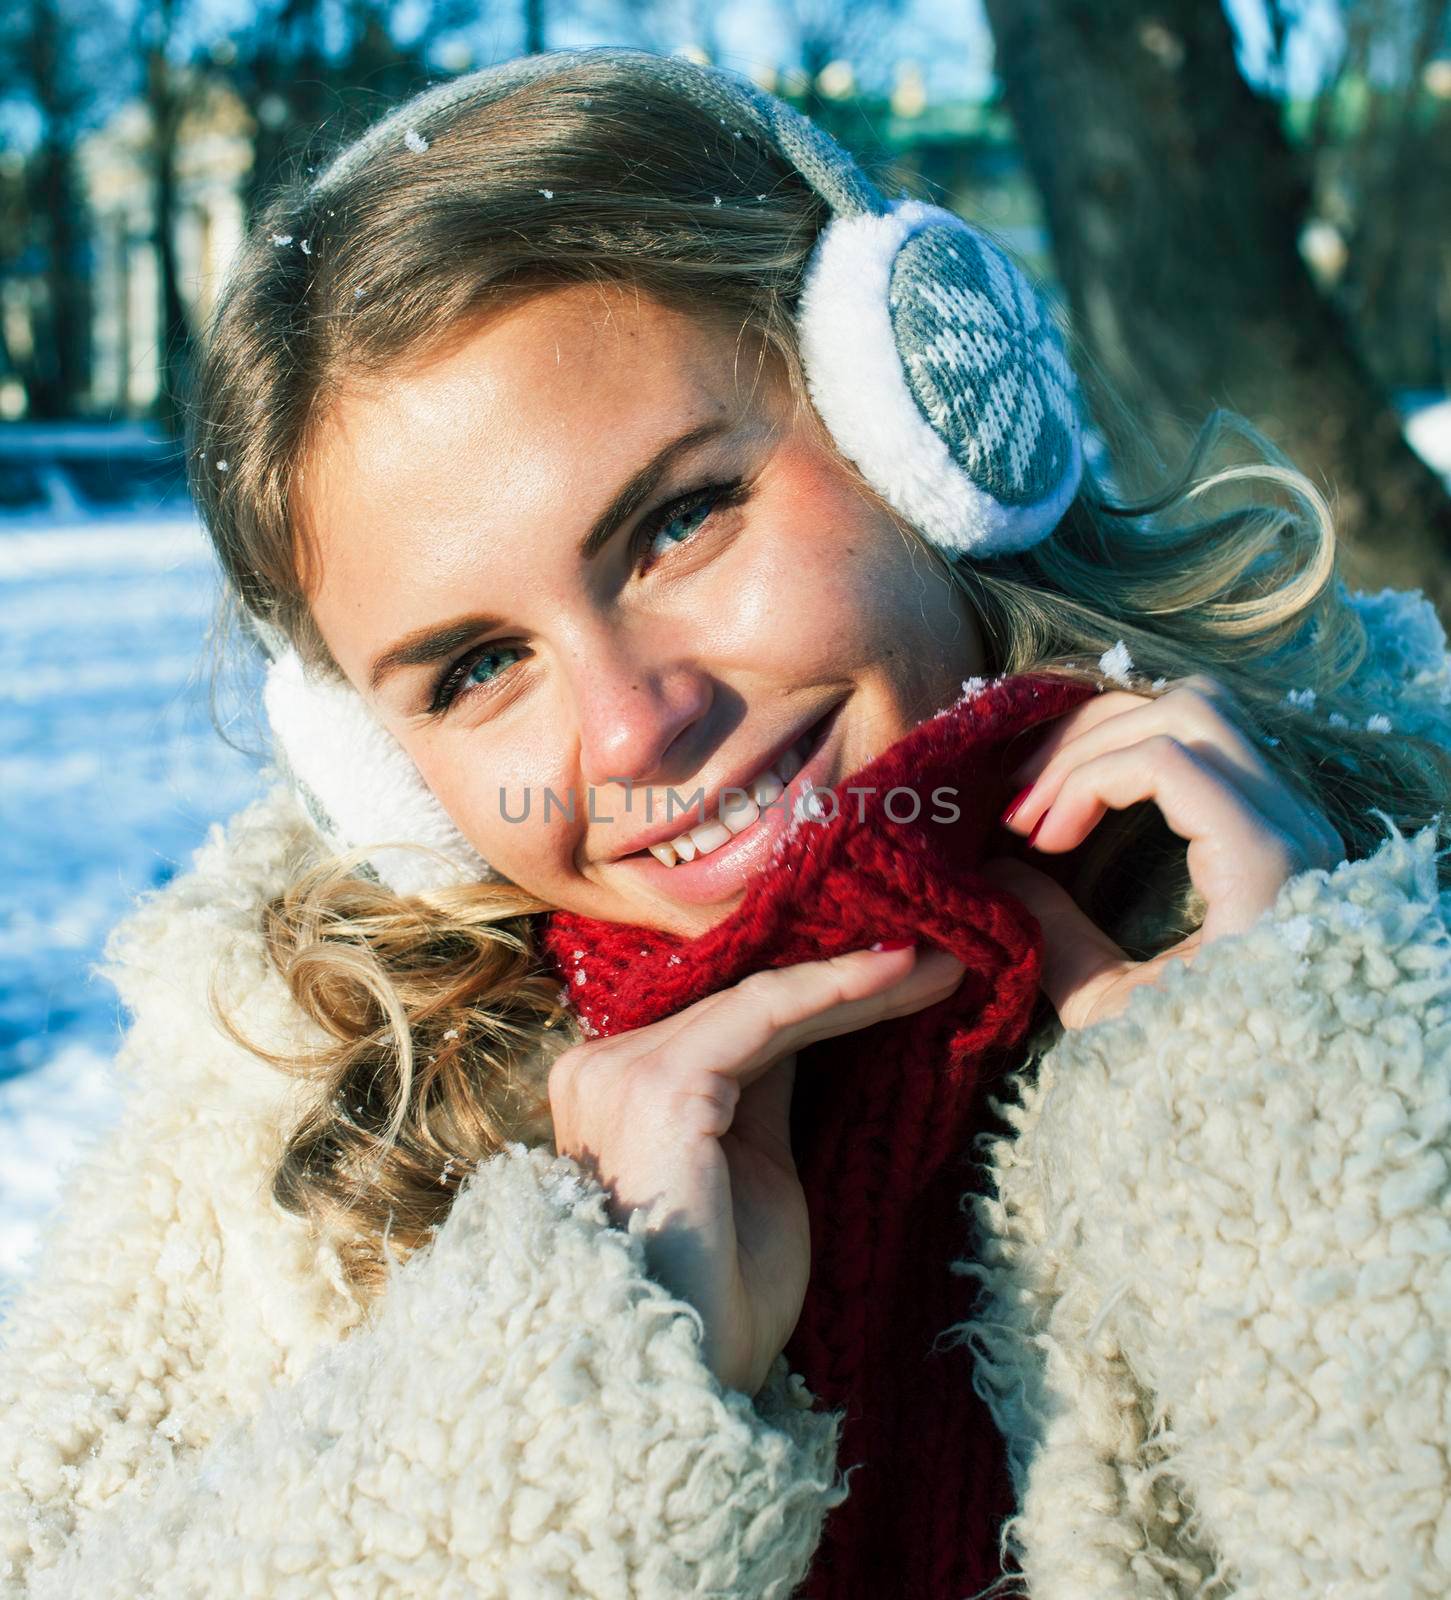 young pretty teenage hipster girl outdoor in winter snow park having fun drinking coffee, warming up happy smiling, lifestyle people concept close up